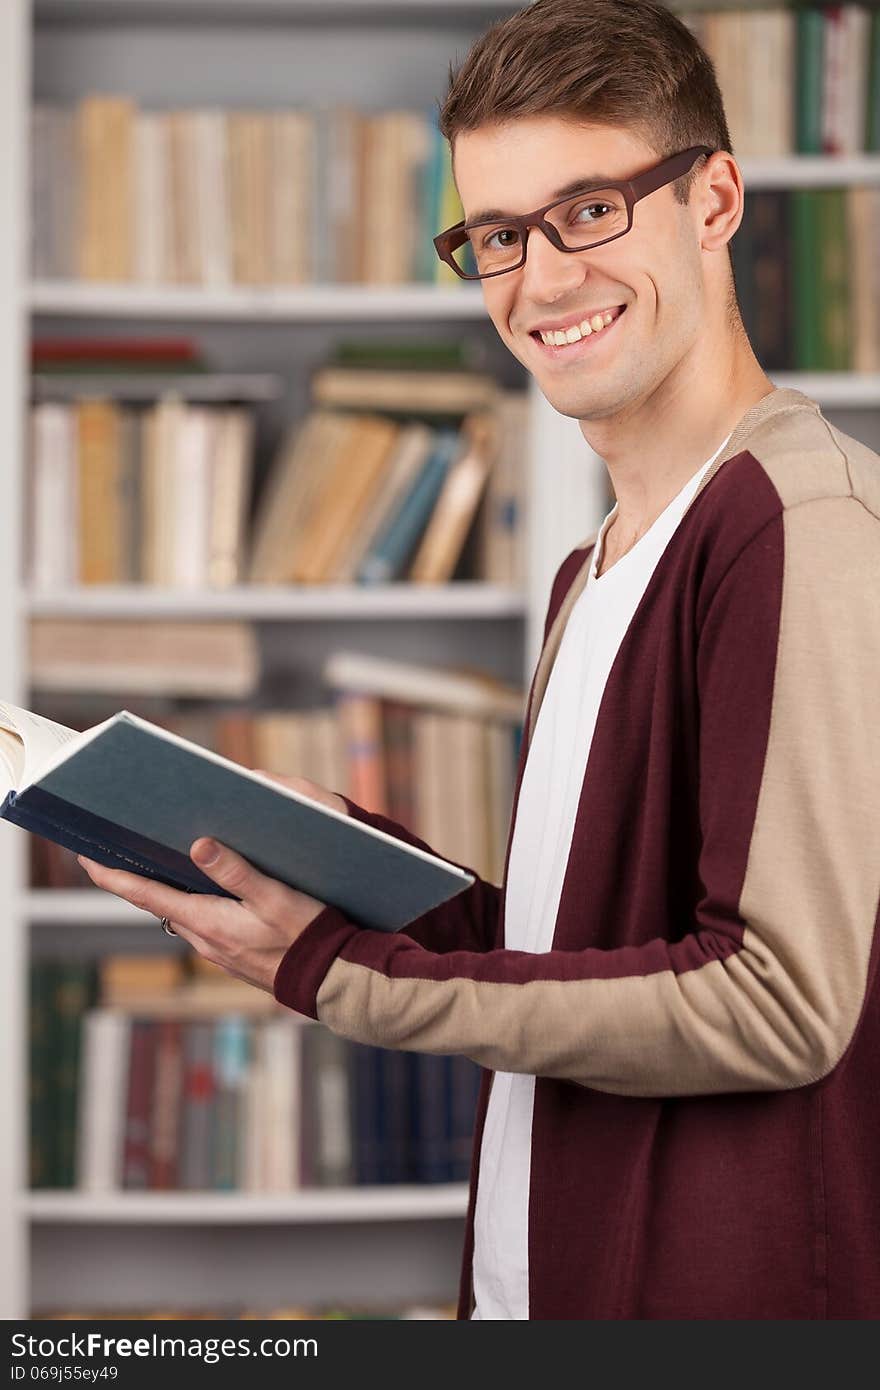 Side view of young man reading a book and smiling while standing at the library. Side view of young man reading a book and smiling while standing at the library